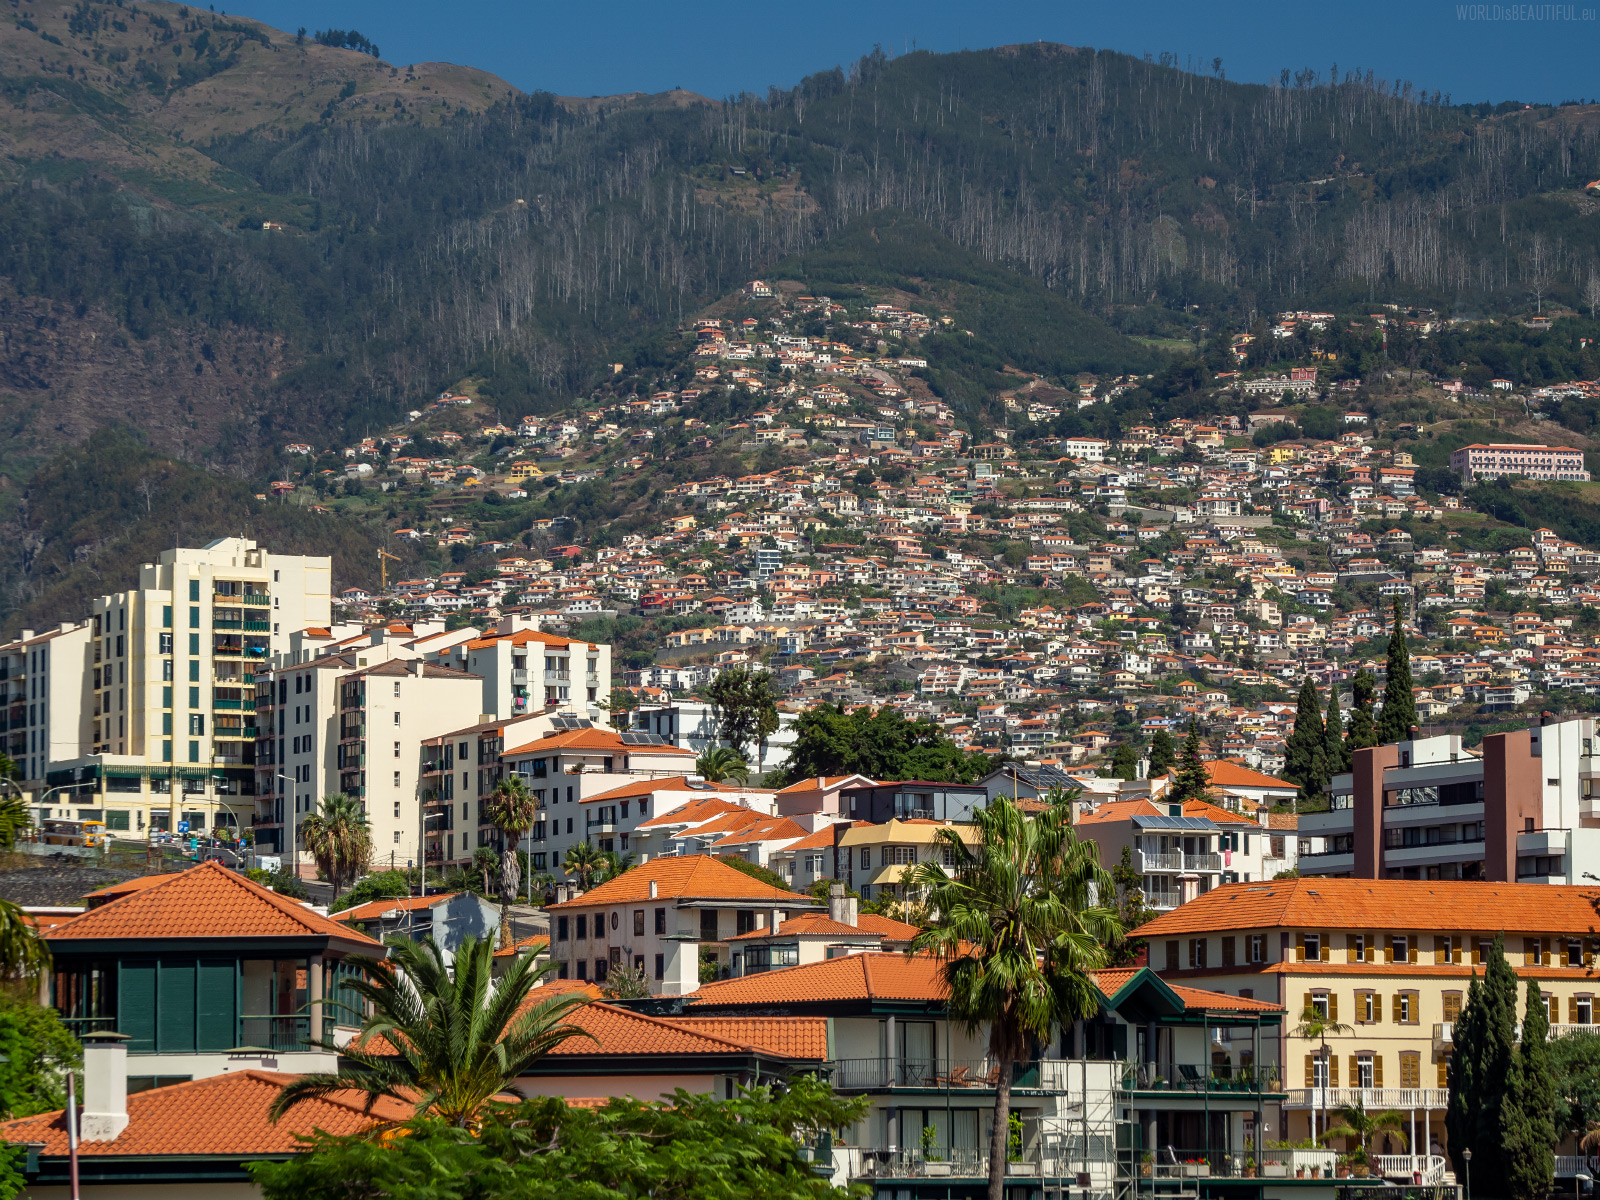 The capital of Madeira